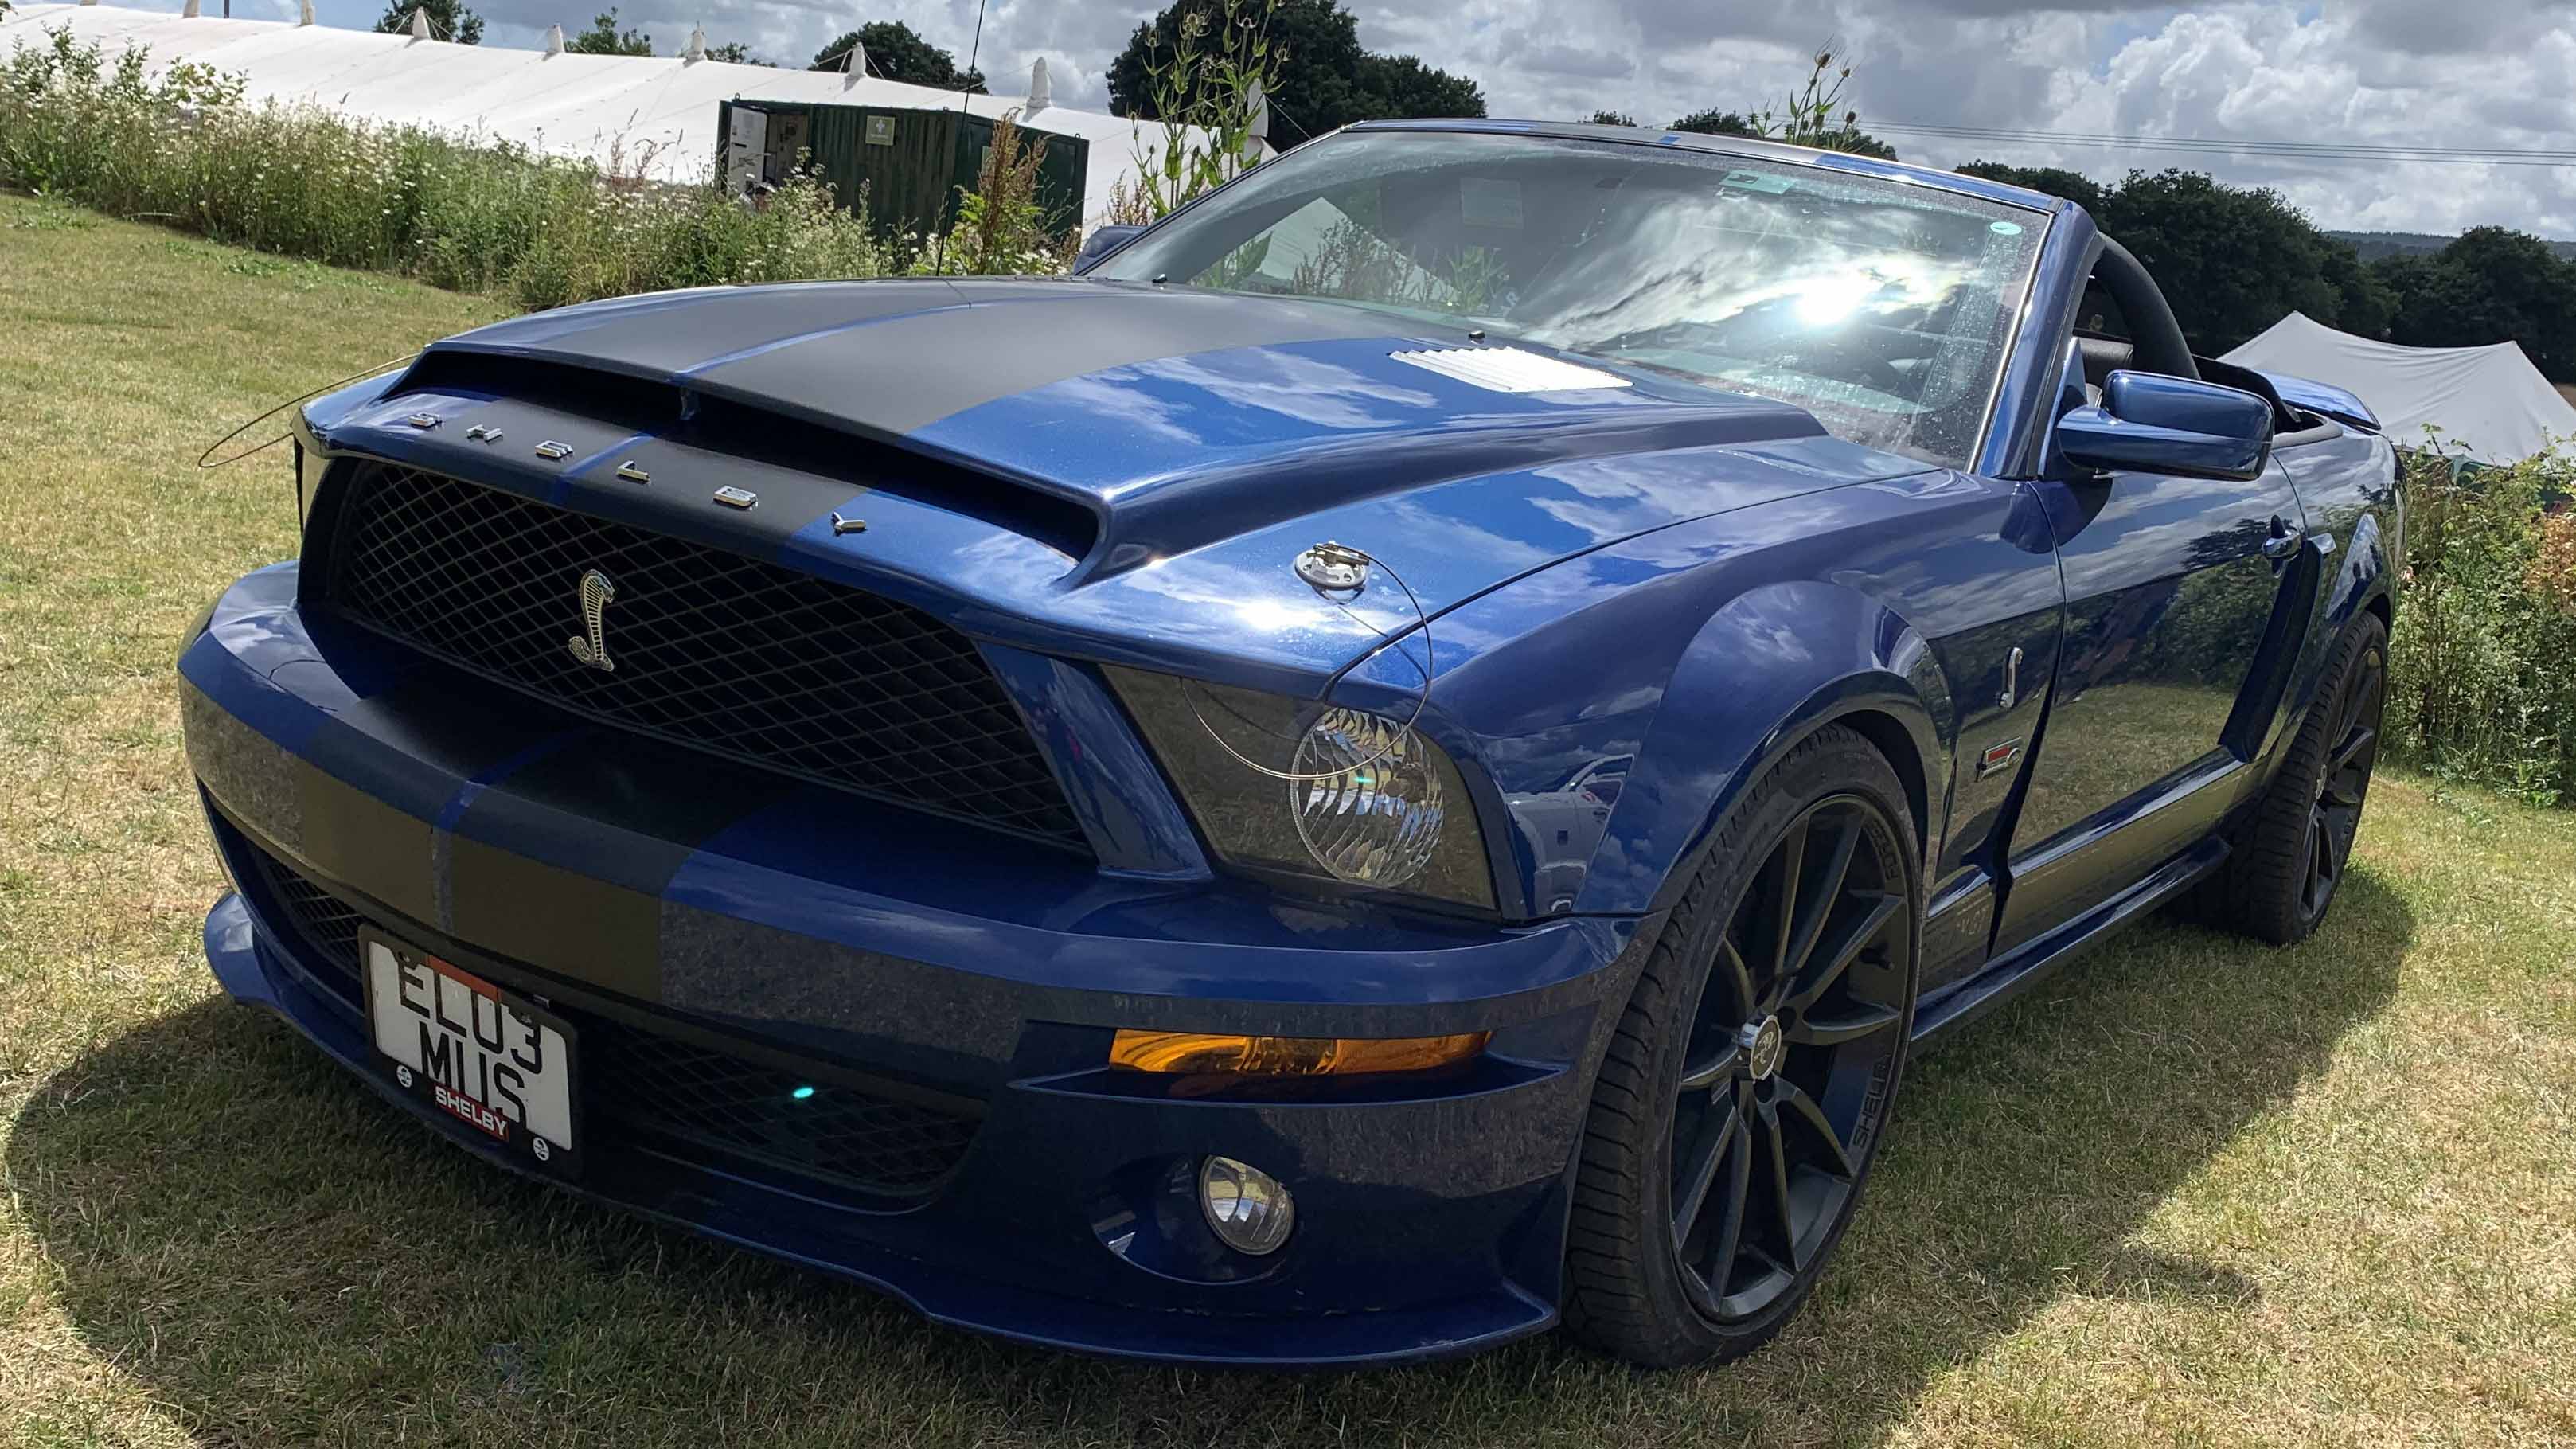 Ford Mustang Convertible Shelby V8 wedding car for hire in Newton Abbot, Devon